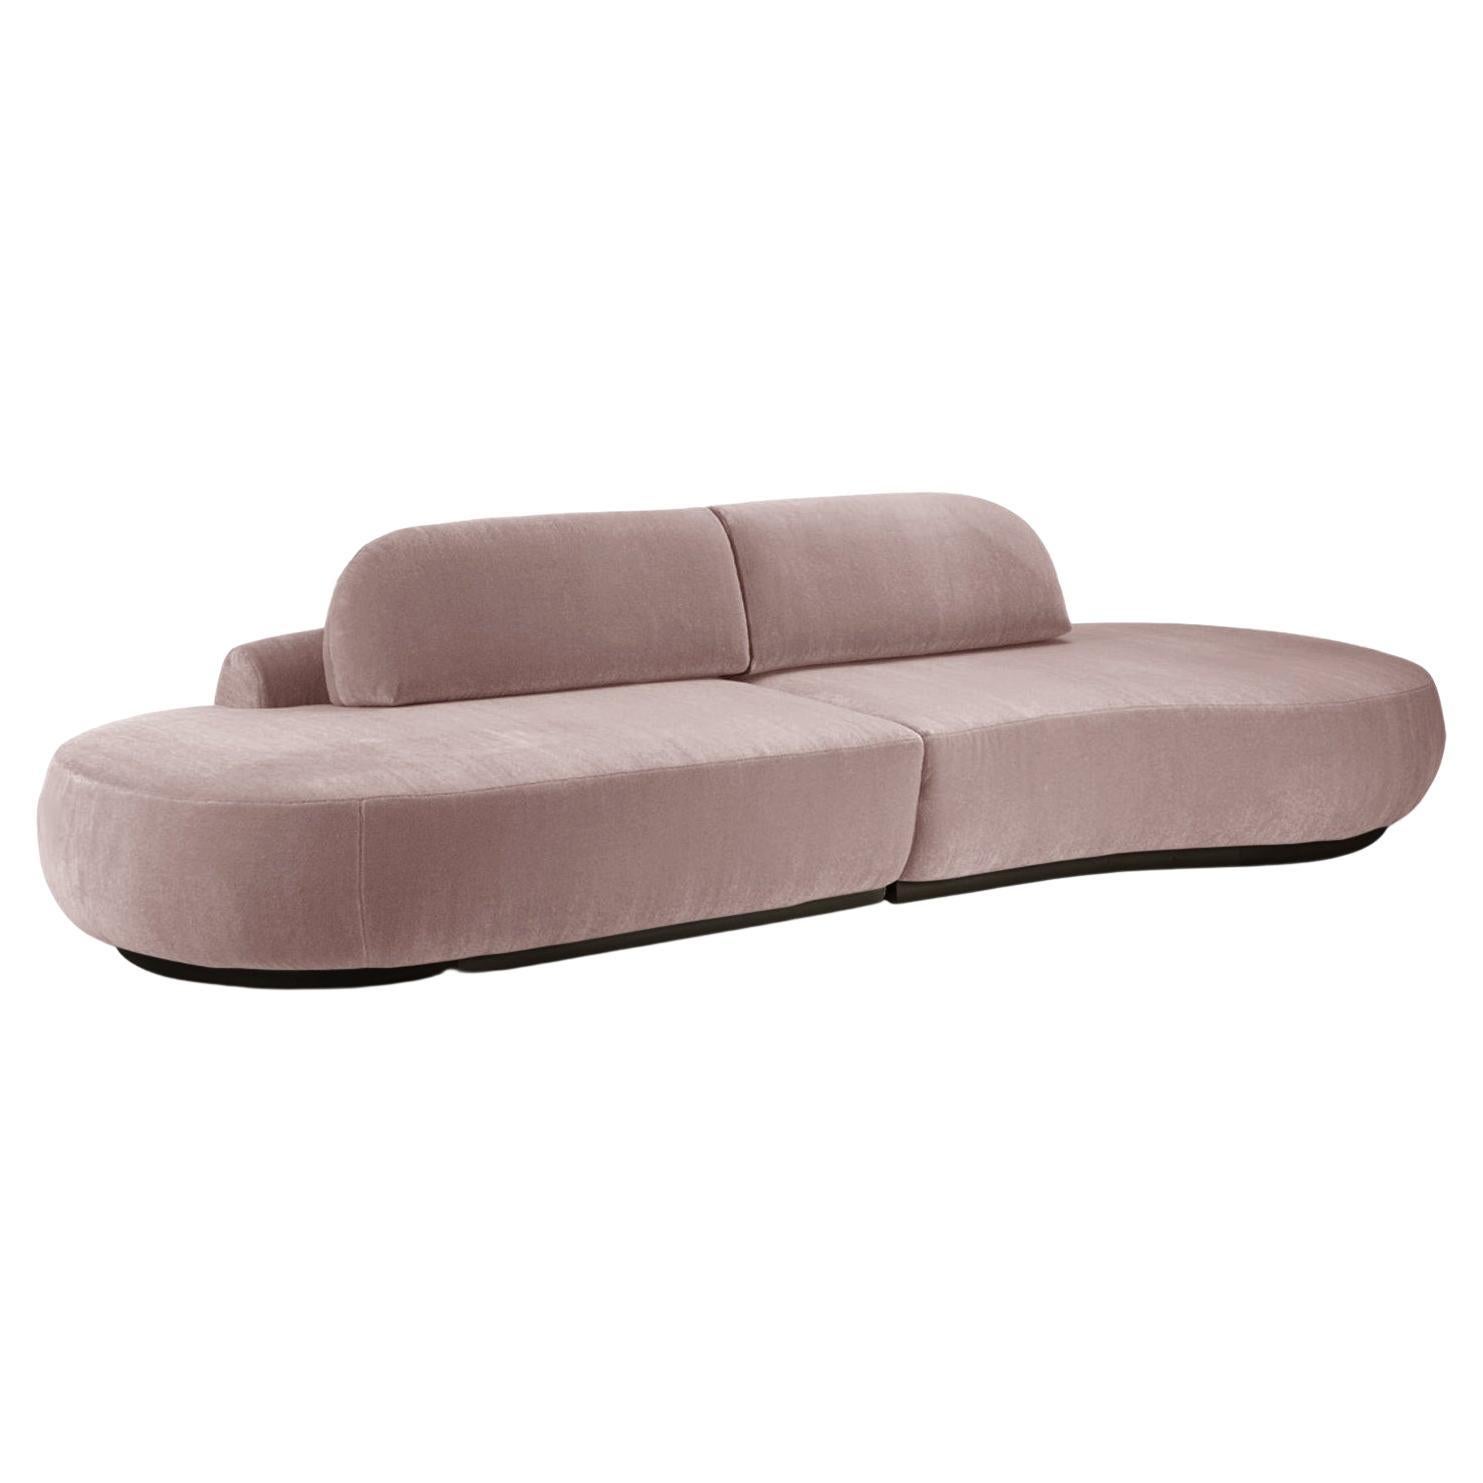 Naked Curved Sectional Sofa, 2 Piece with Beech Ash-056-5 and Barcelona Lotus For Sale